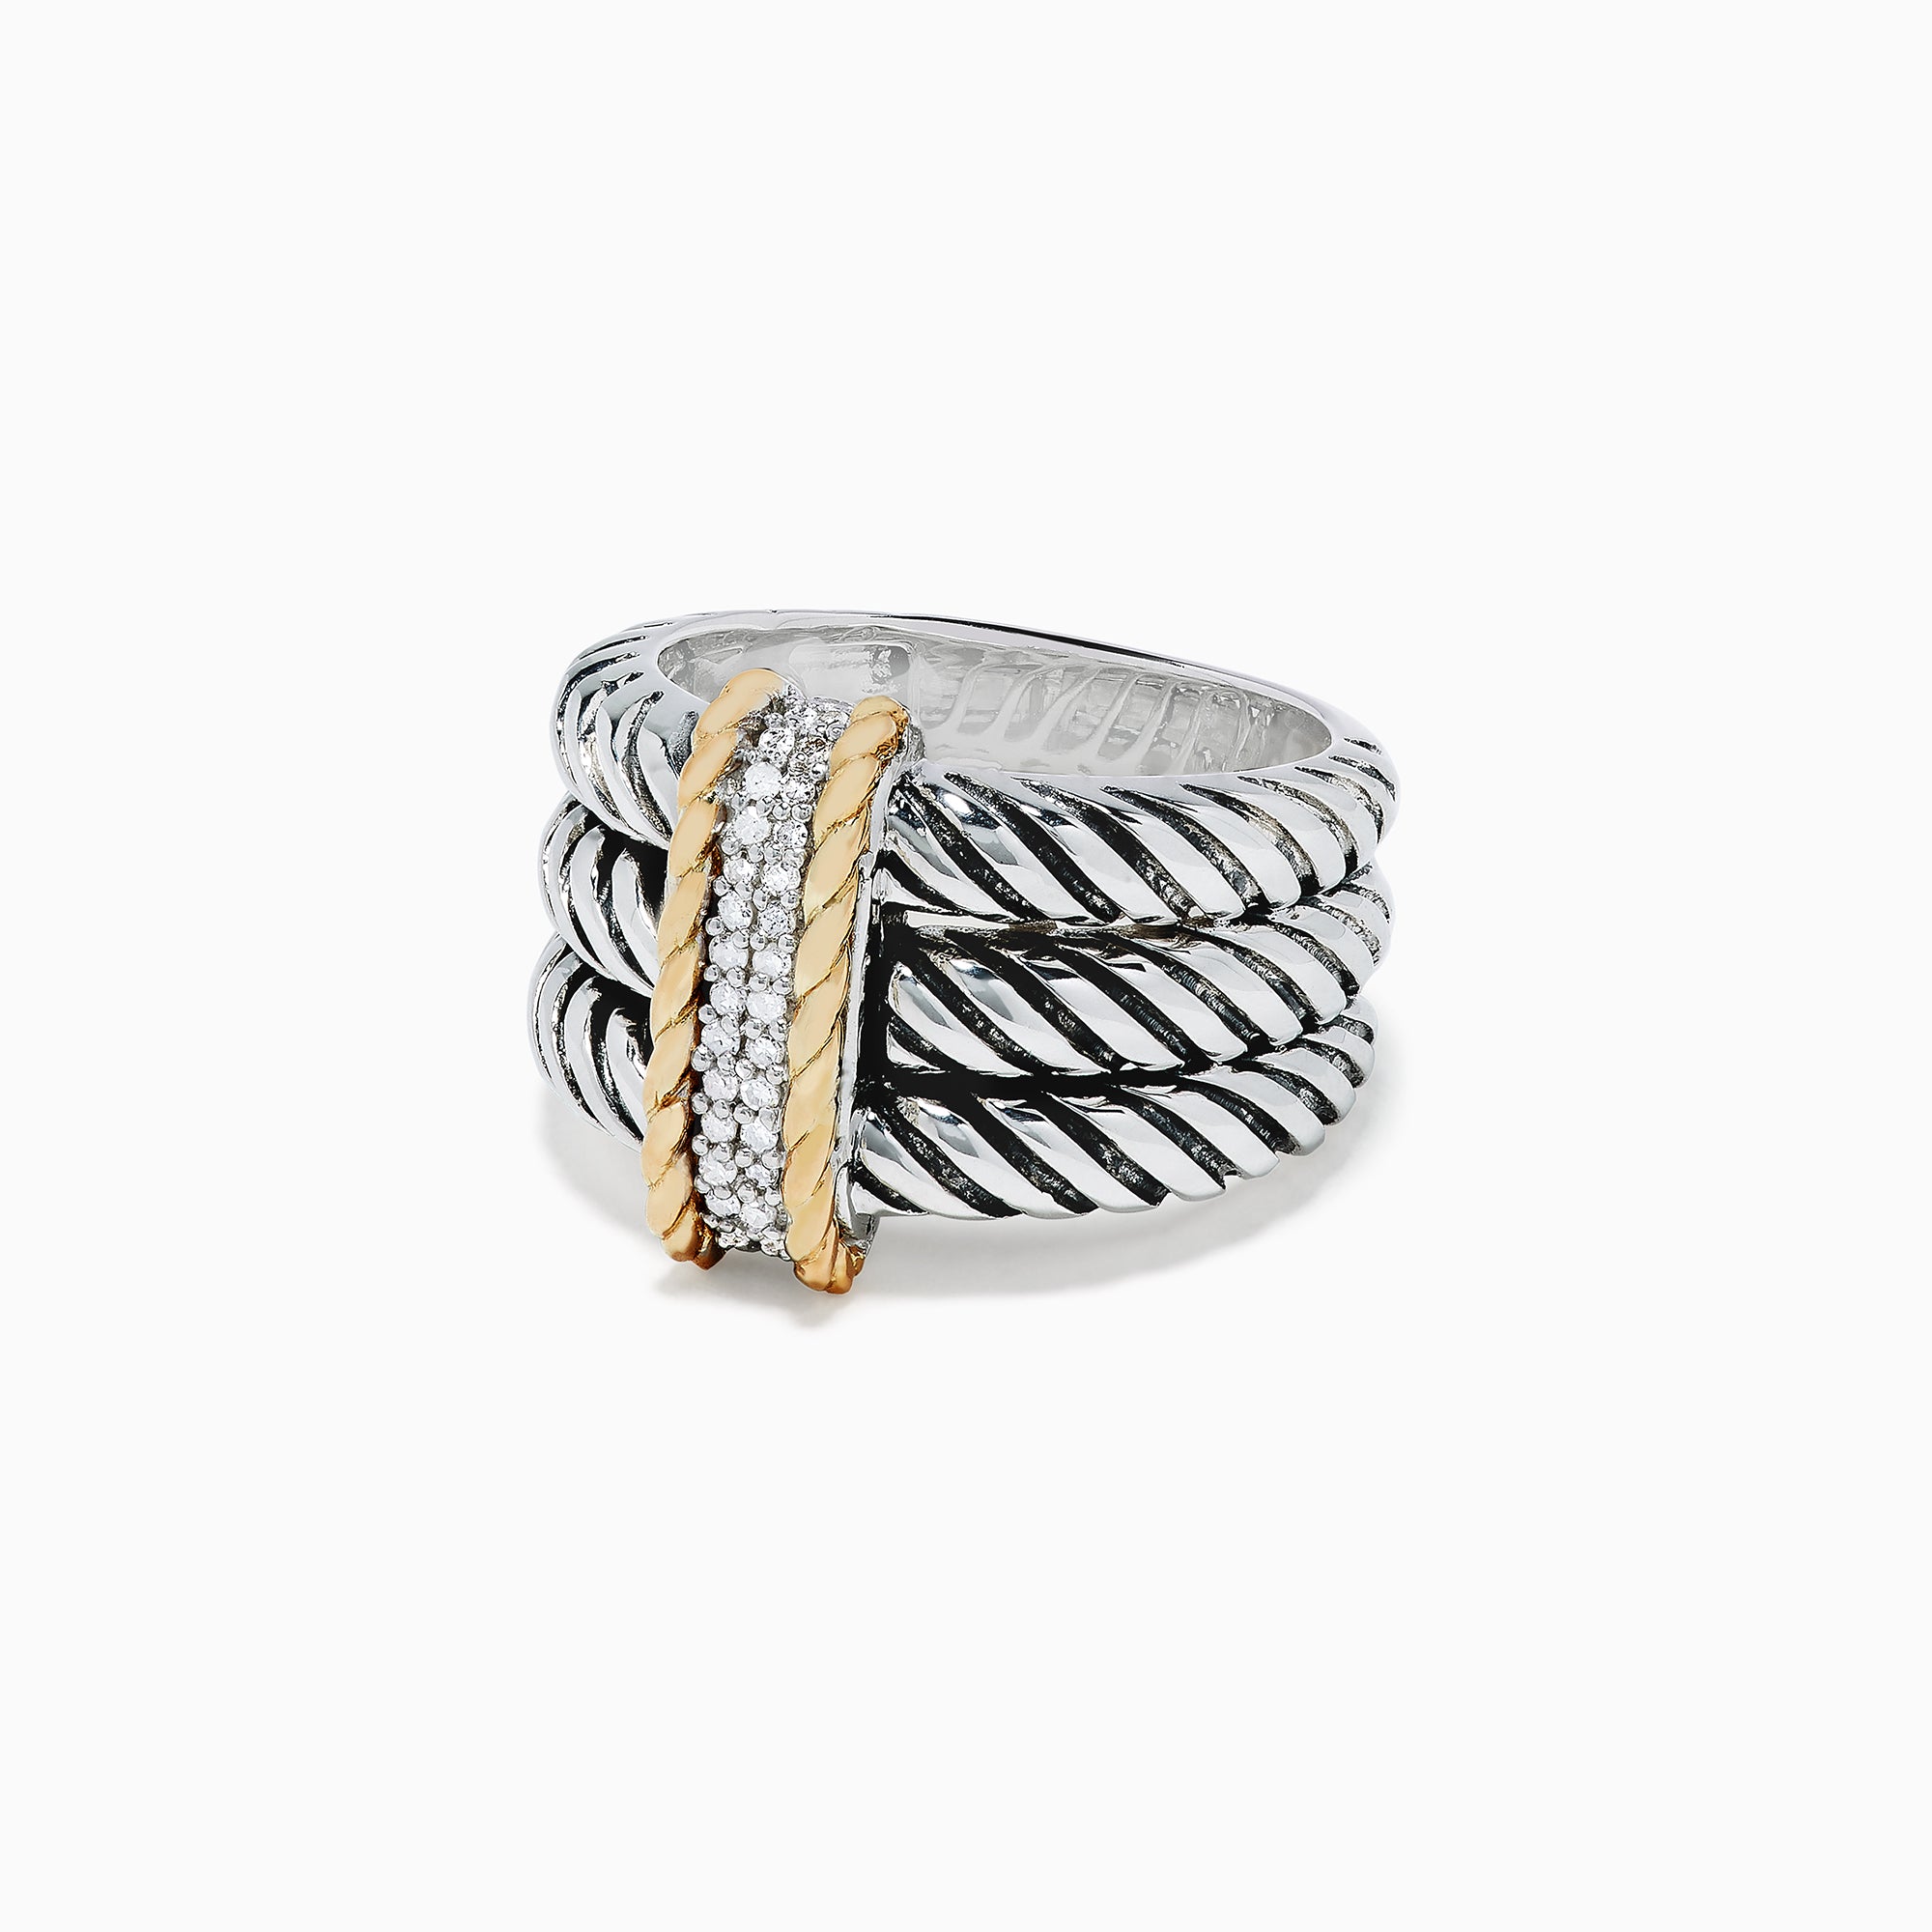 Effy Sterling Silver and 18K Yellow Gold Diamond Ring, 0.14 TCW